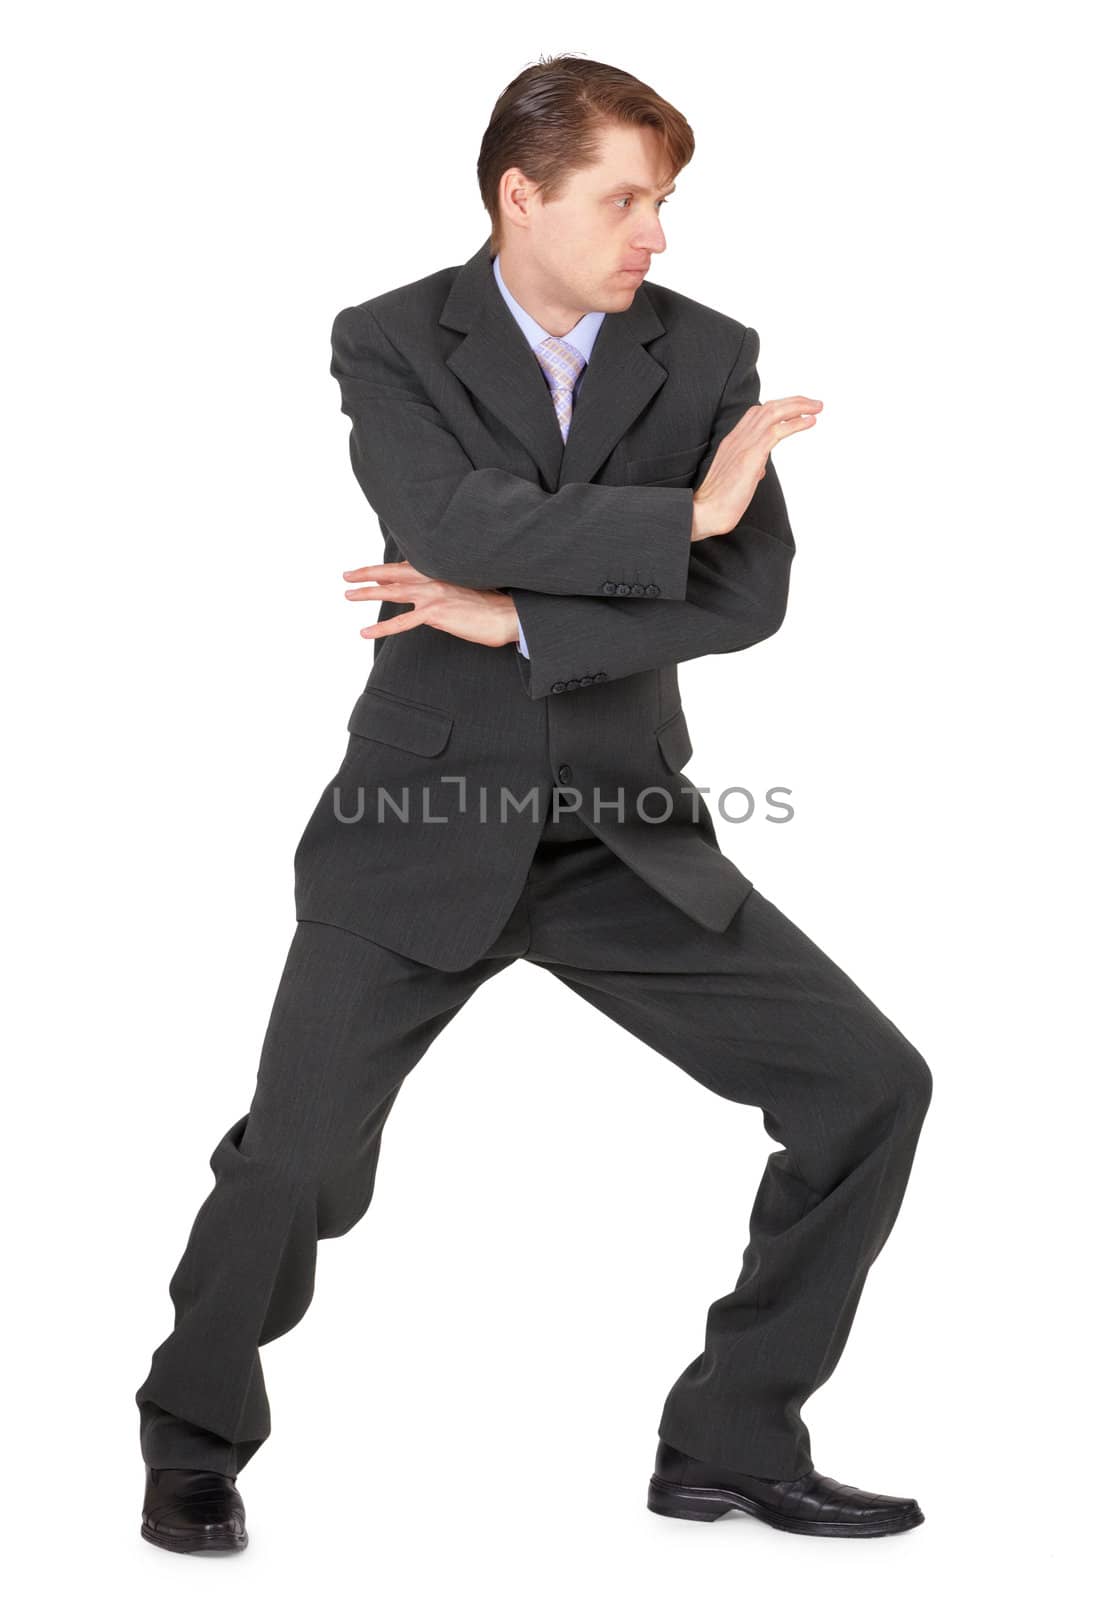 Businessman showing karate skills, isolated on a white background